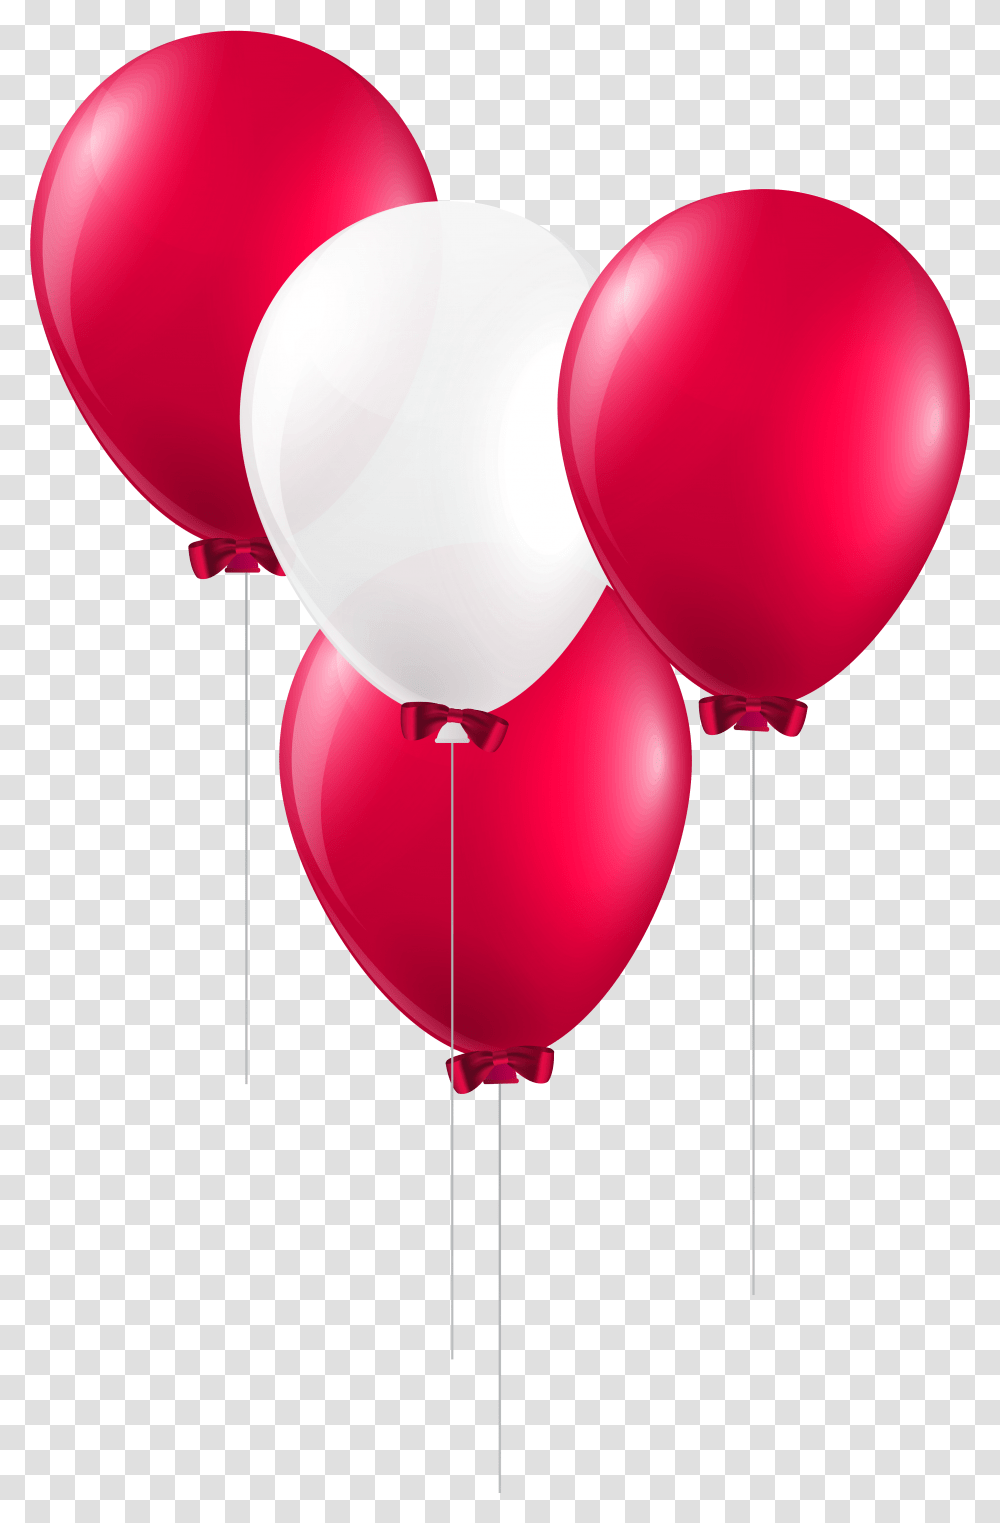 White For Red Balloons Transparent Png